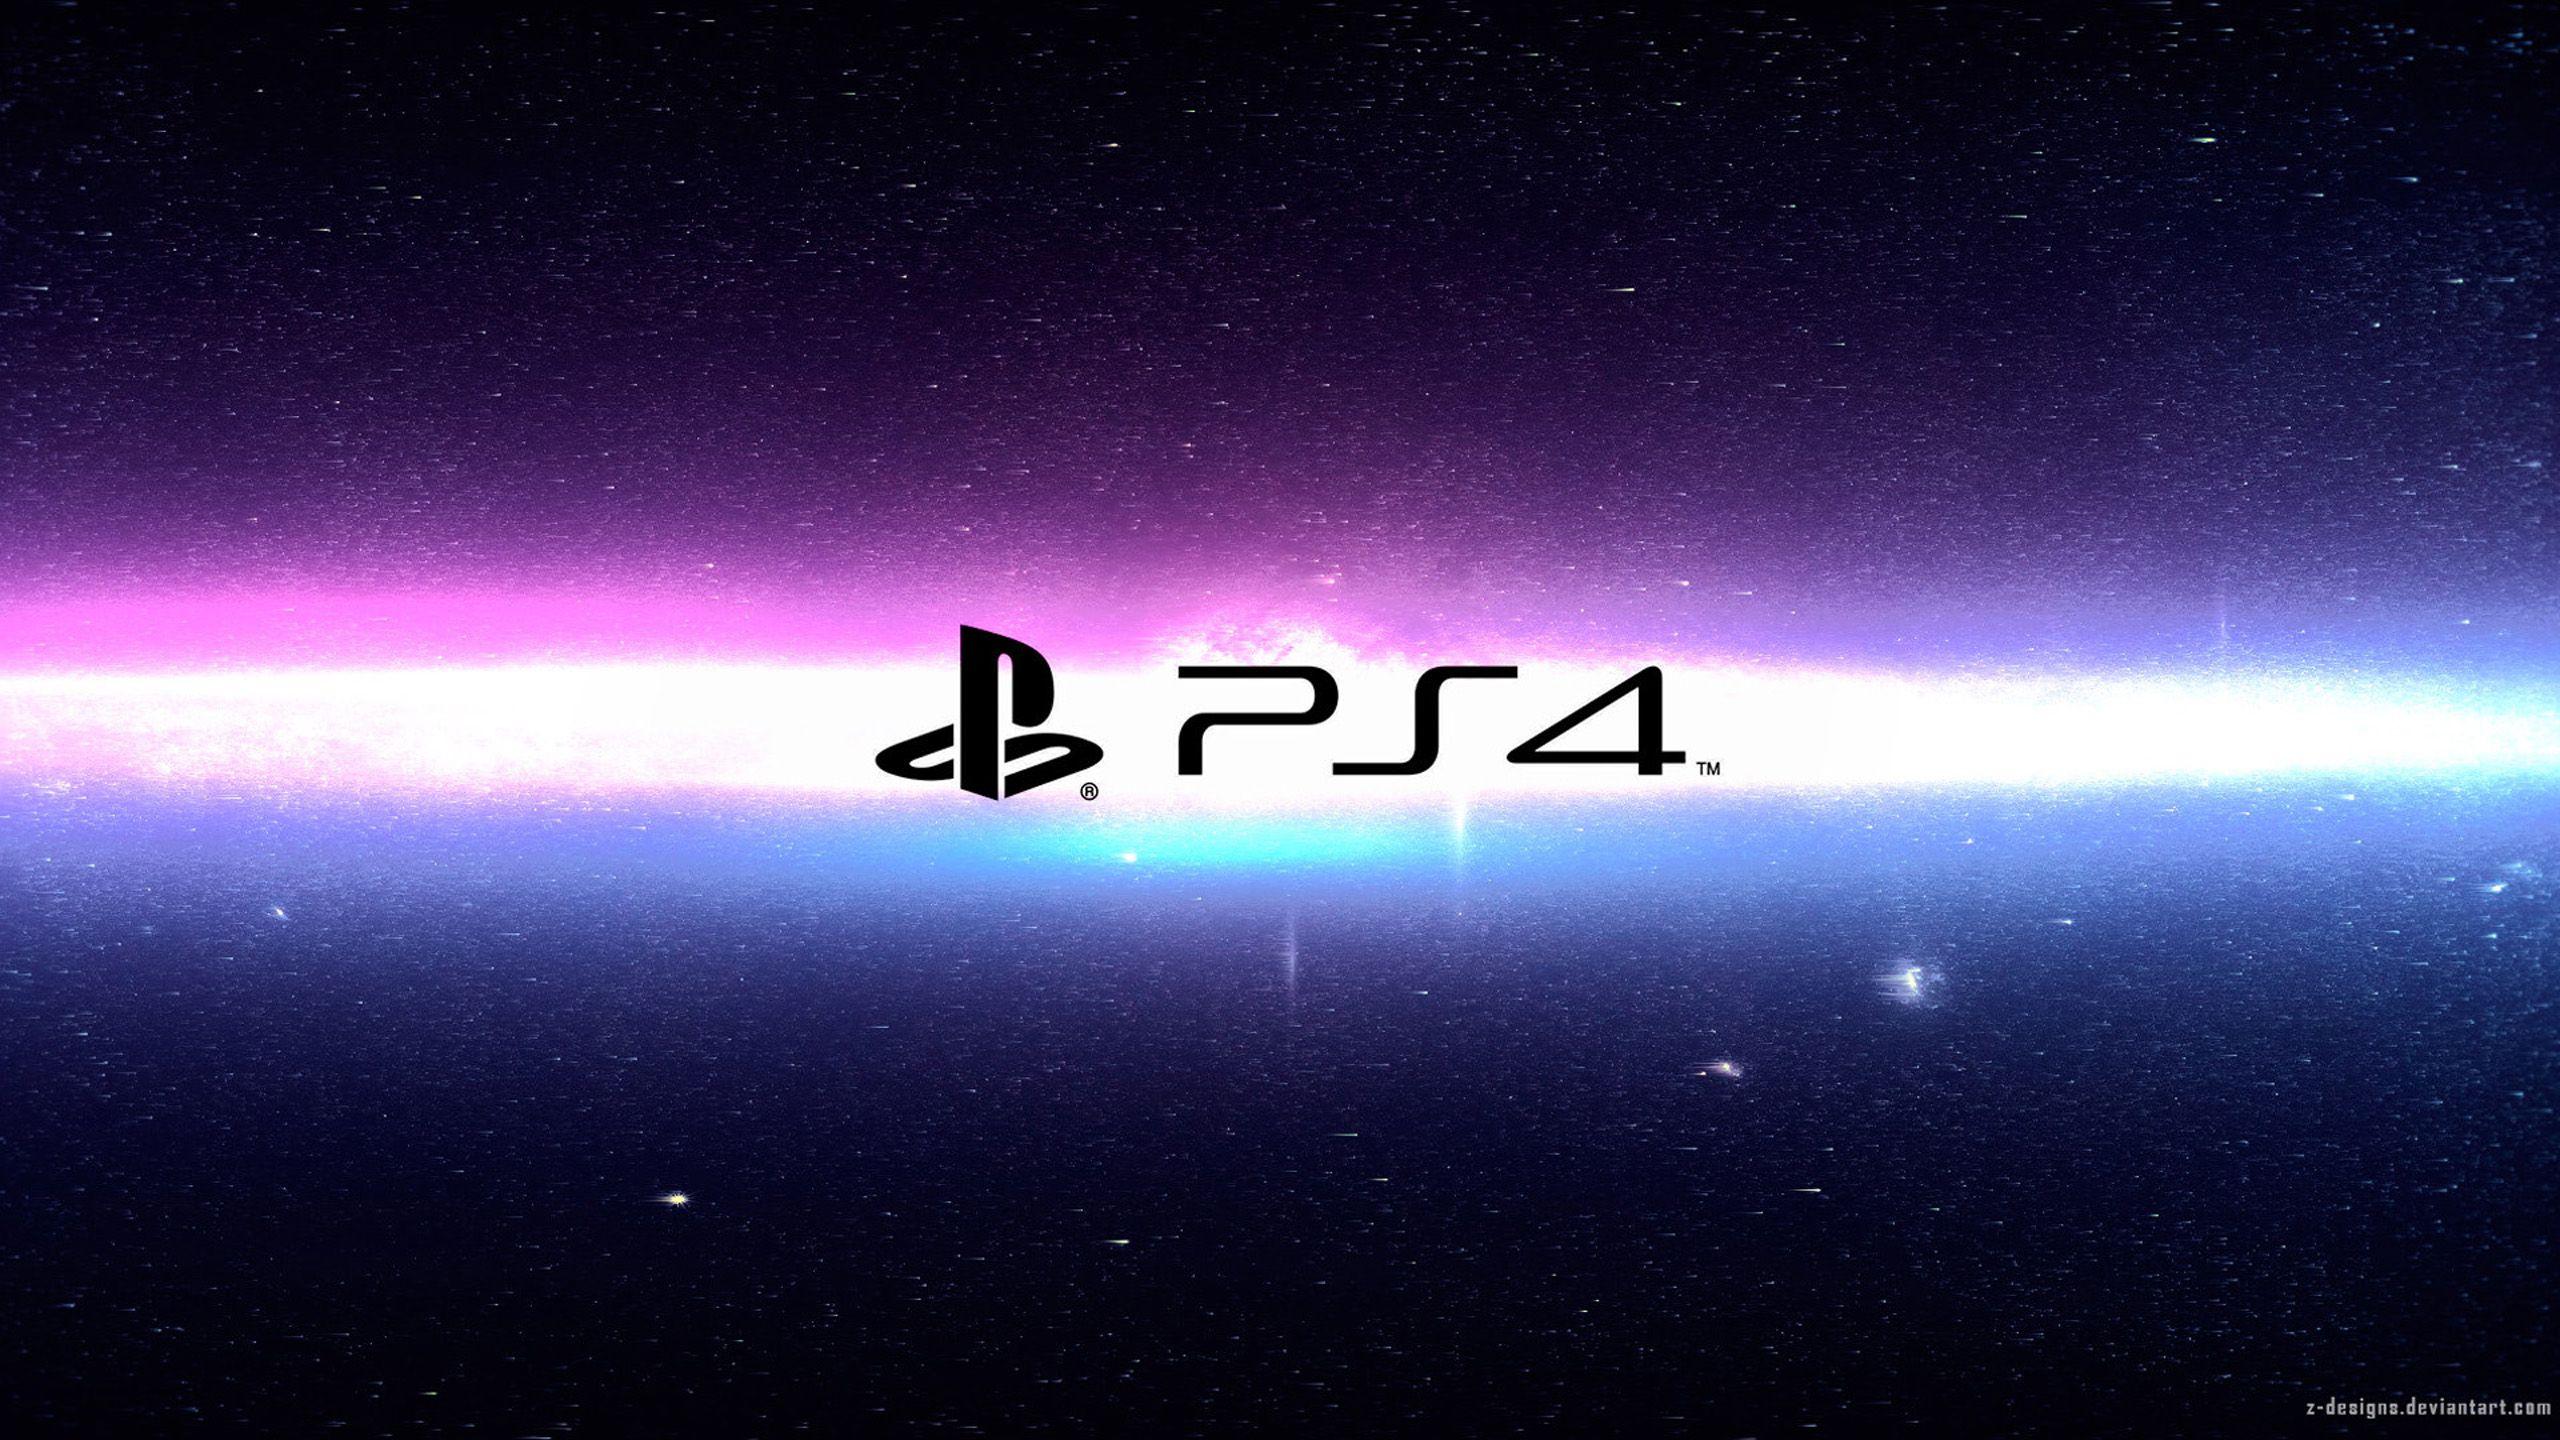 Galaxy PS4 Wallpaper Free Galaxy PS4 Background